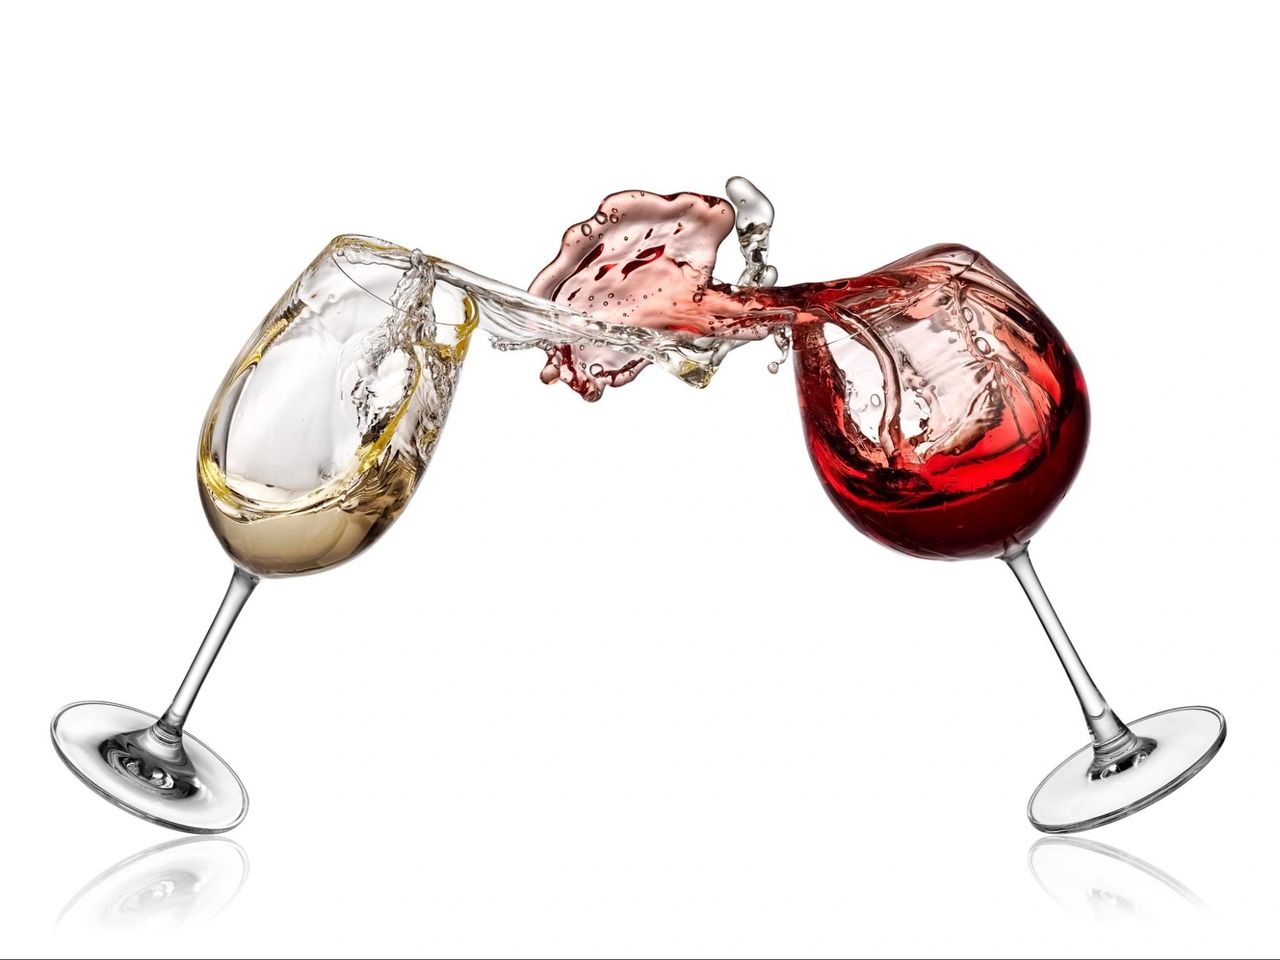 What Is the Difference Between Red Wine and White Wine?